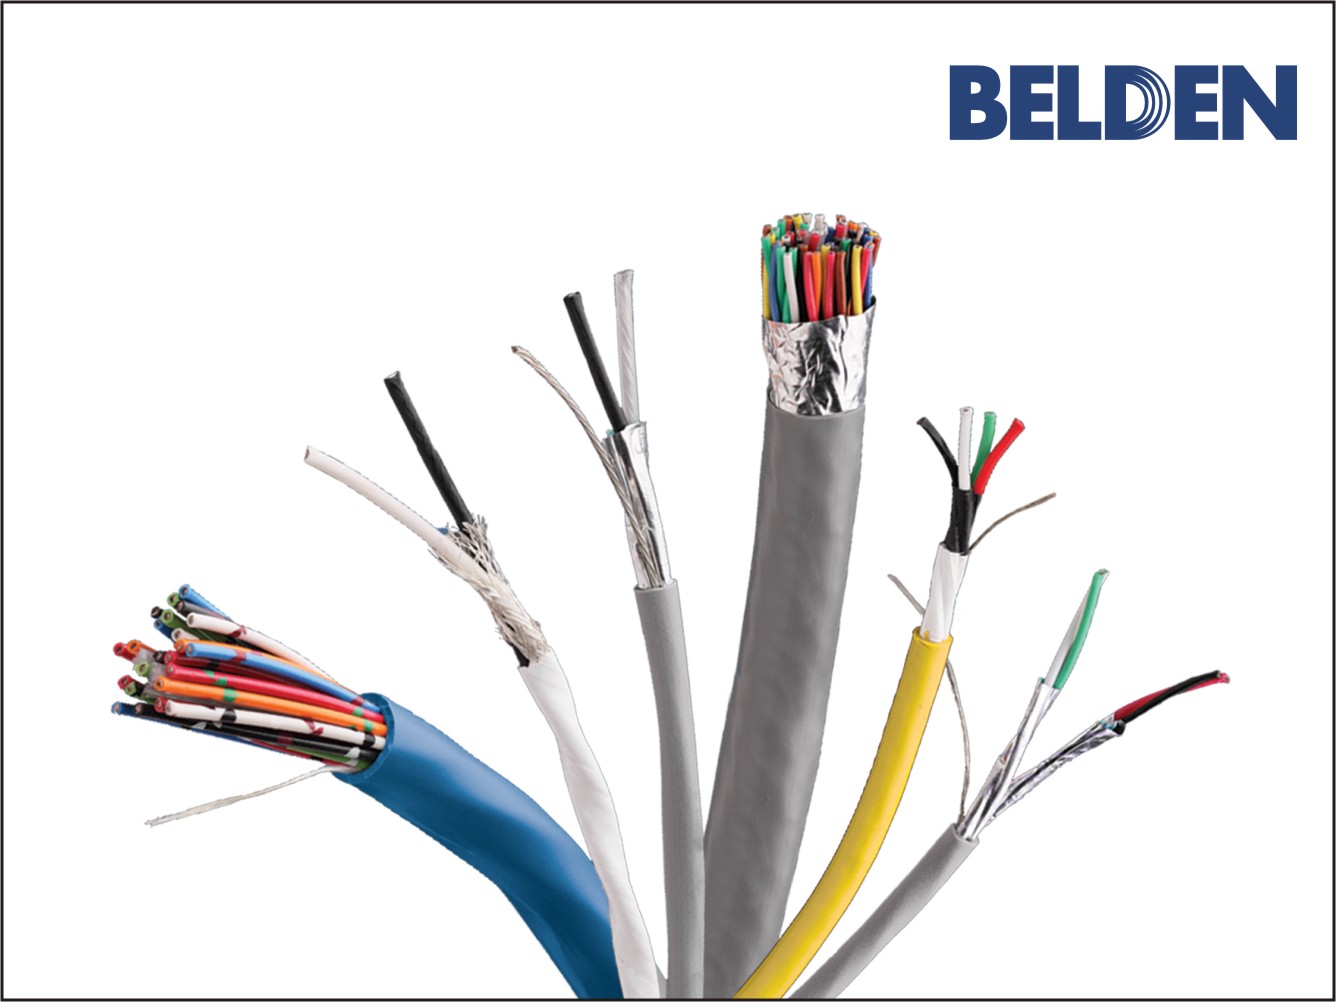 Belden SpaceMaker Space-Saving Cables